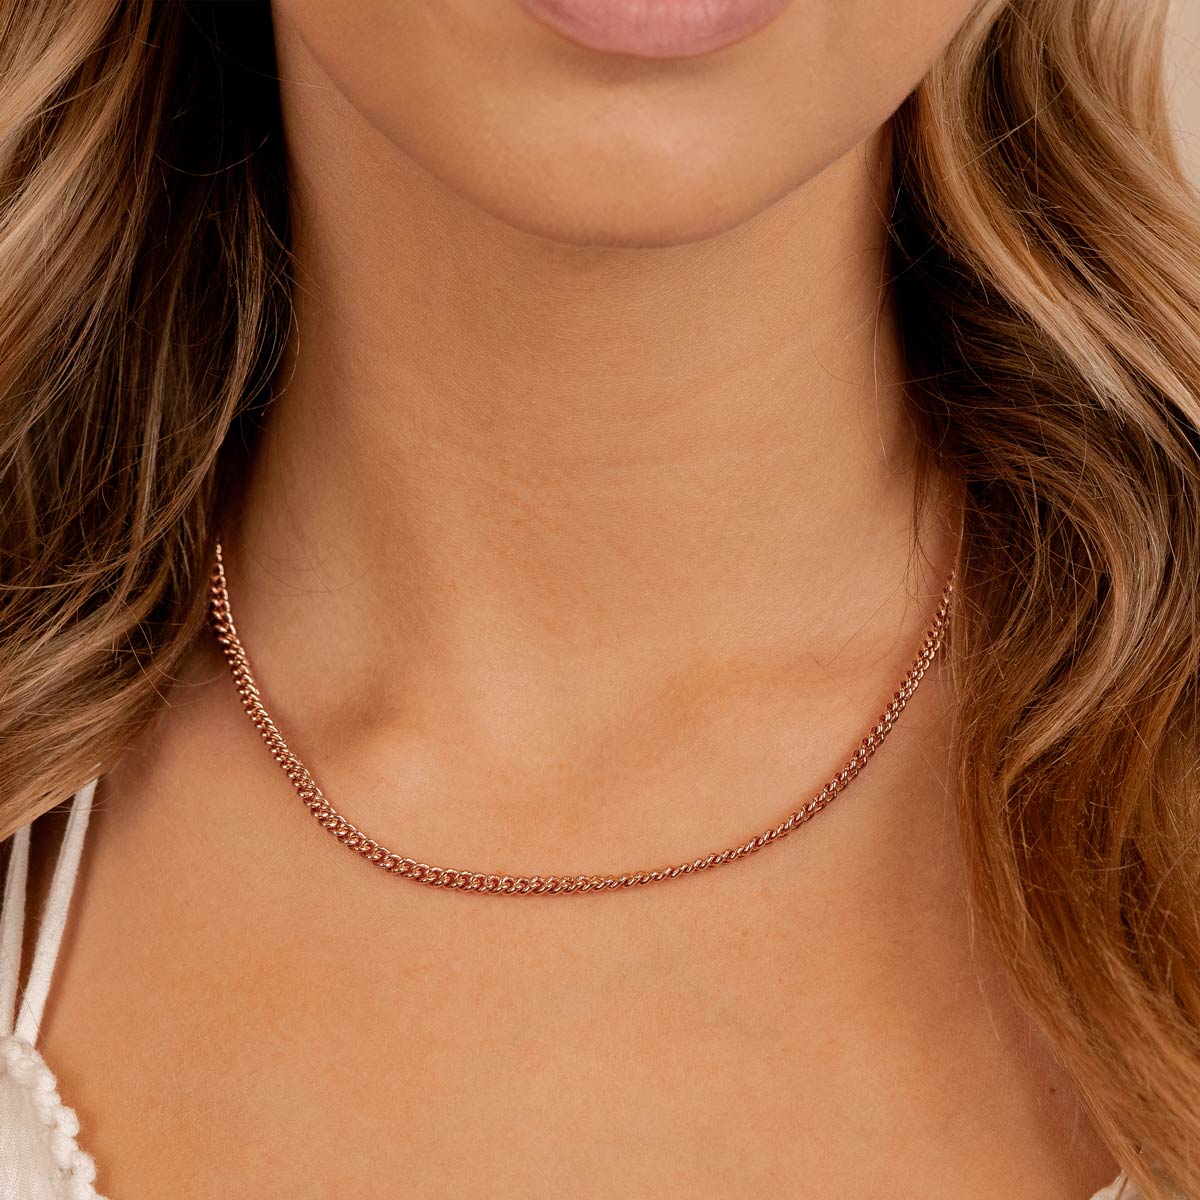 Simple thin chain necklace rose gold